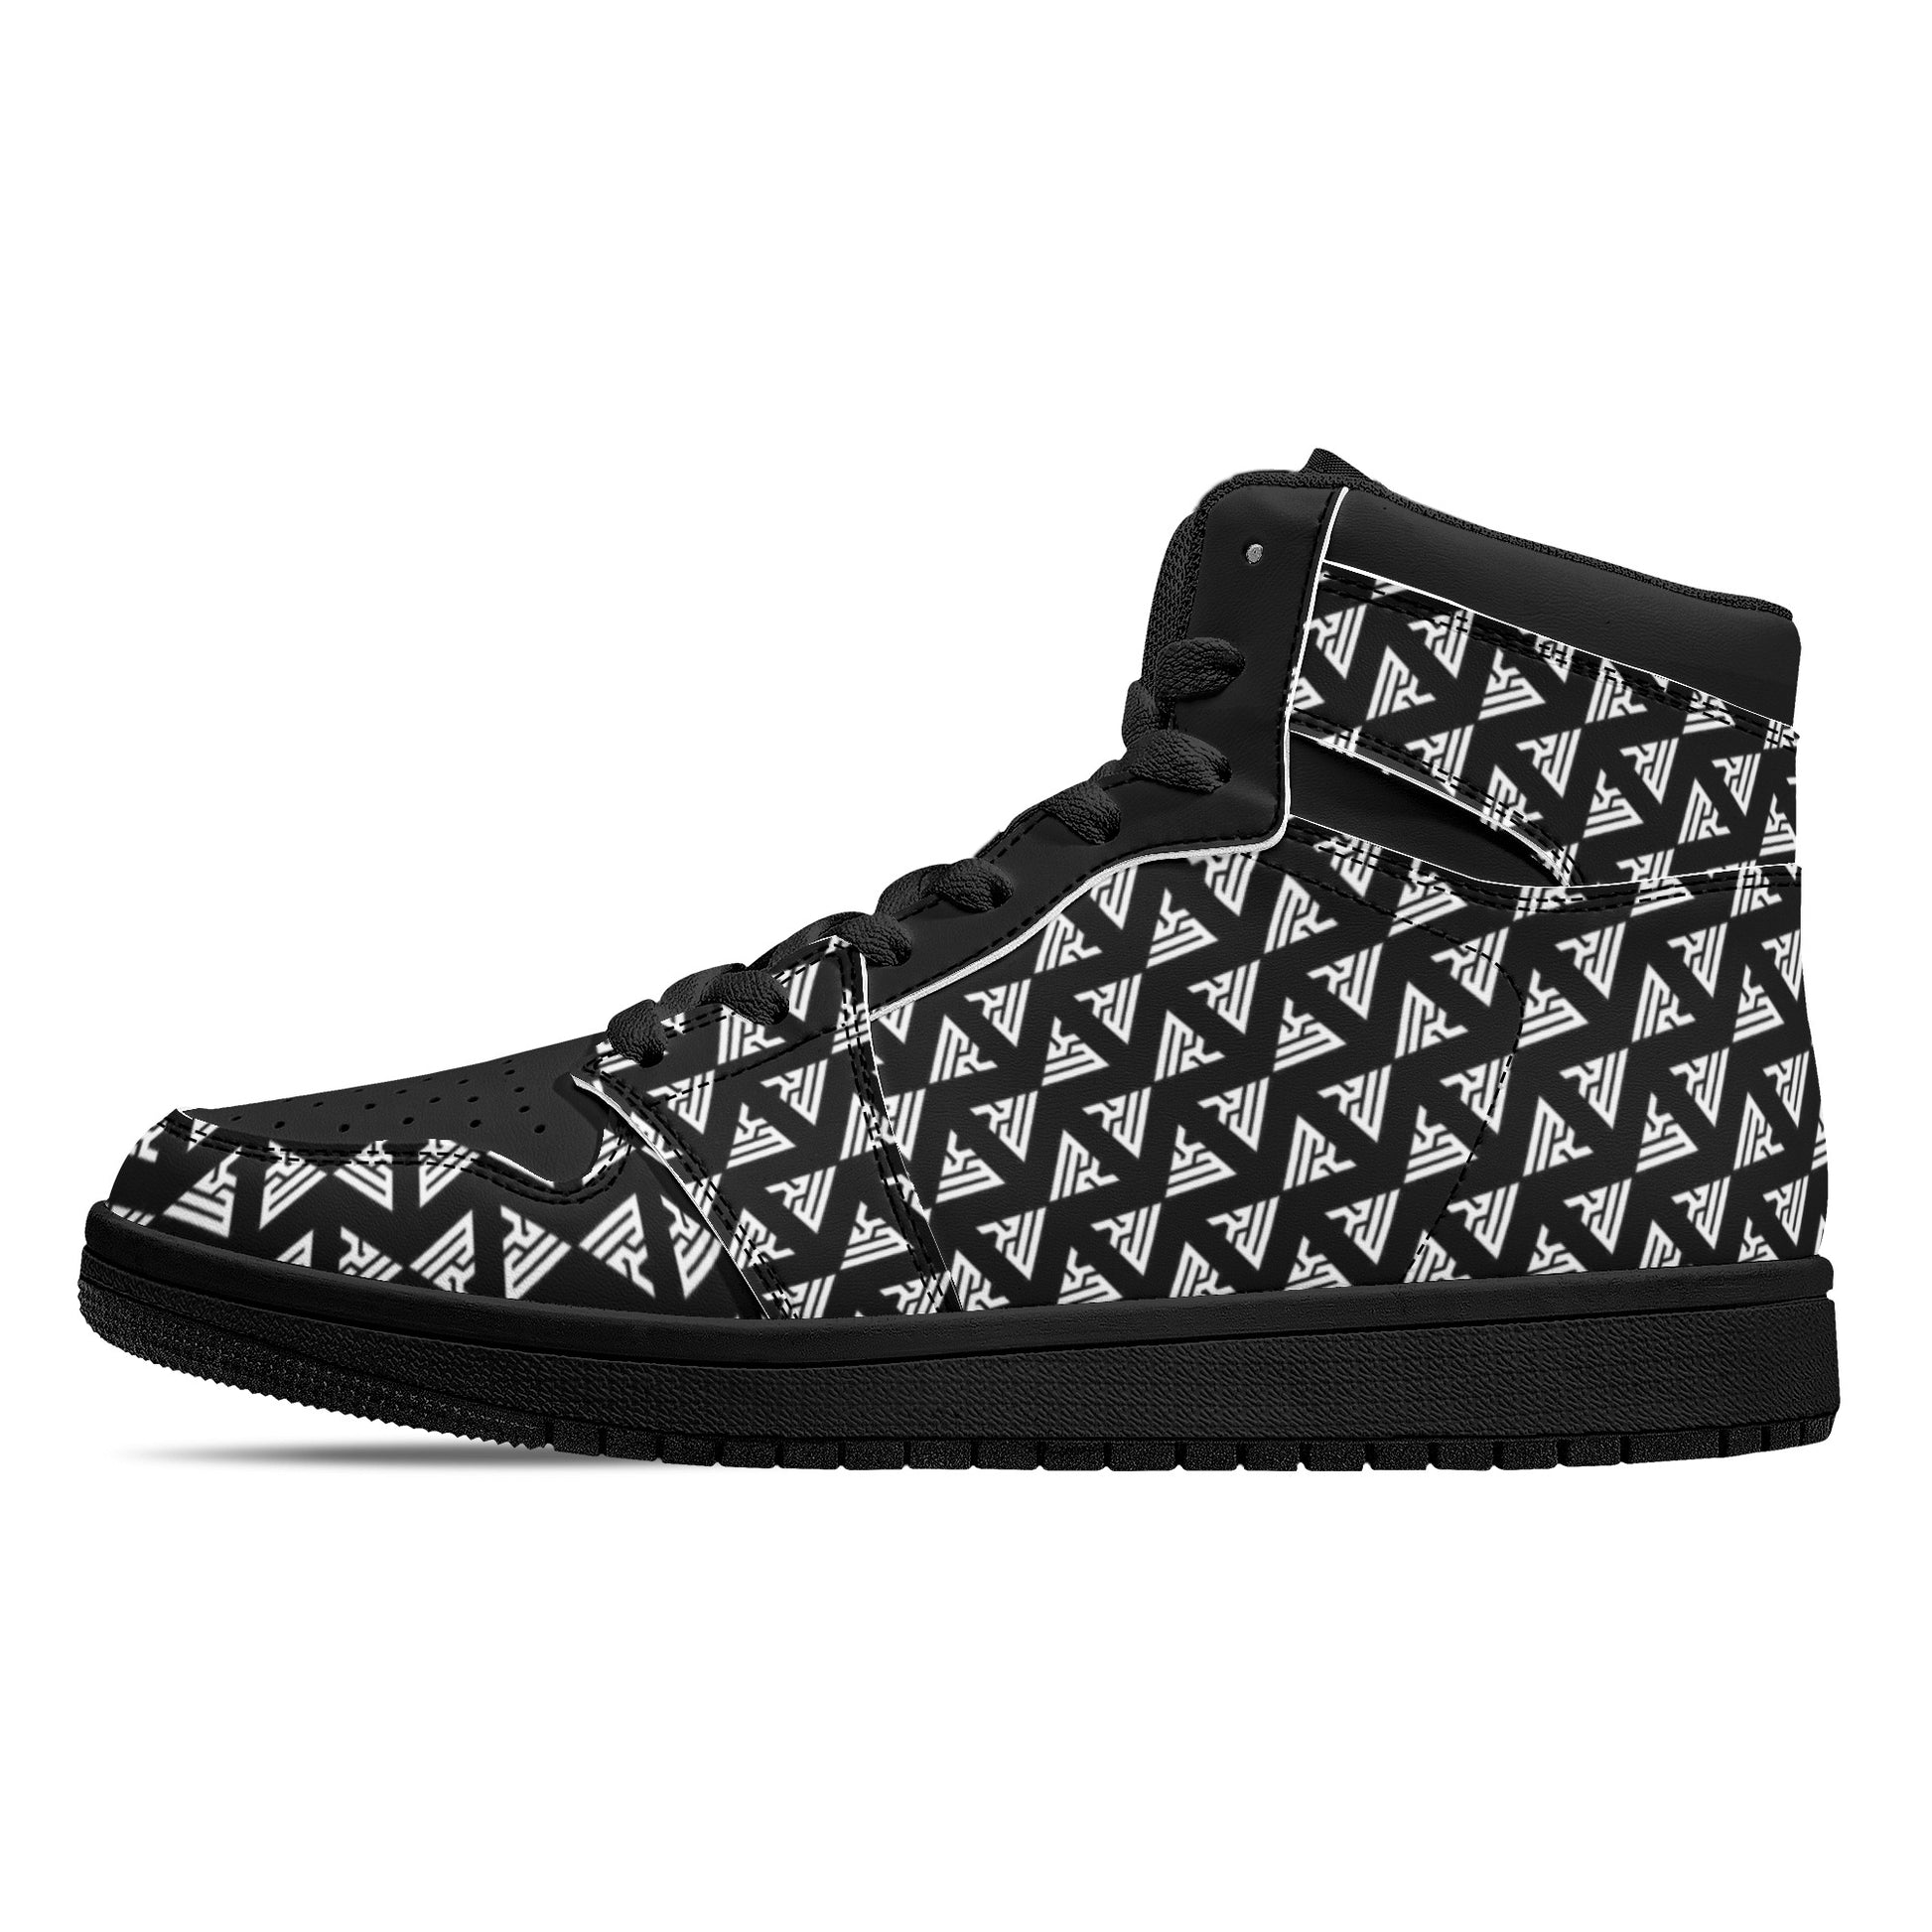 Rongoworks Spartan Black High Top Vegan Leather Sneakers Rongoworks